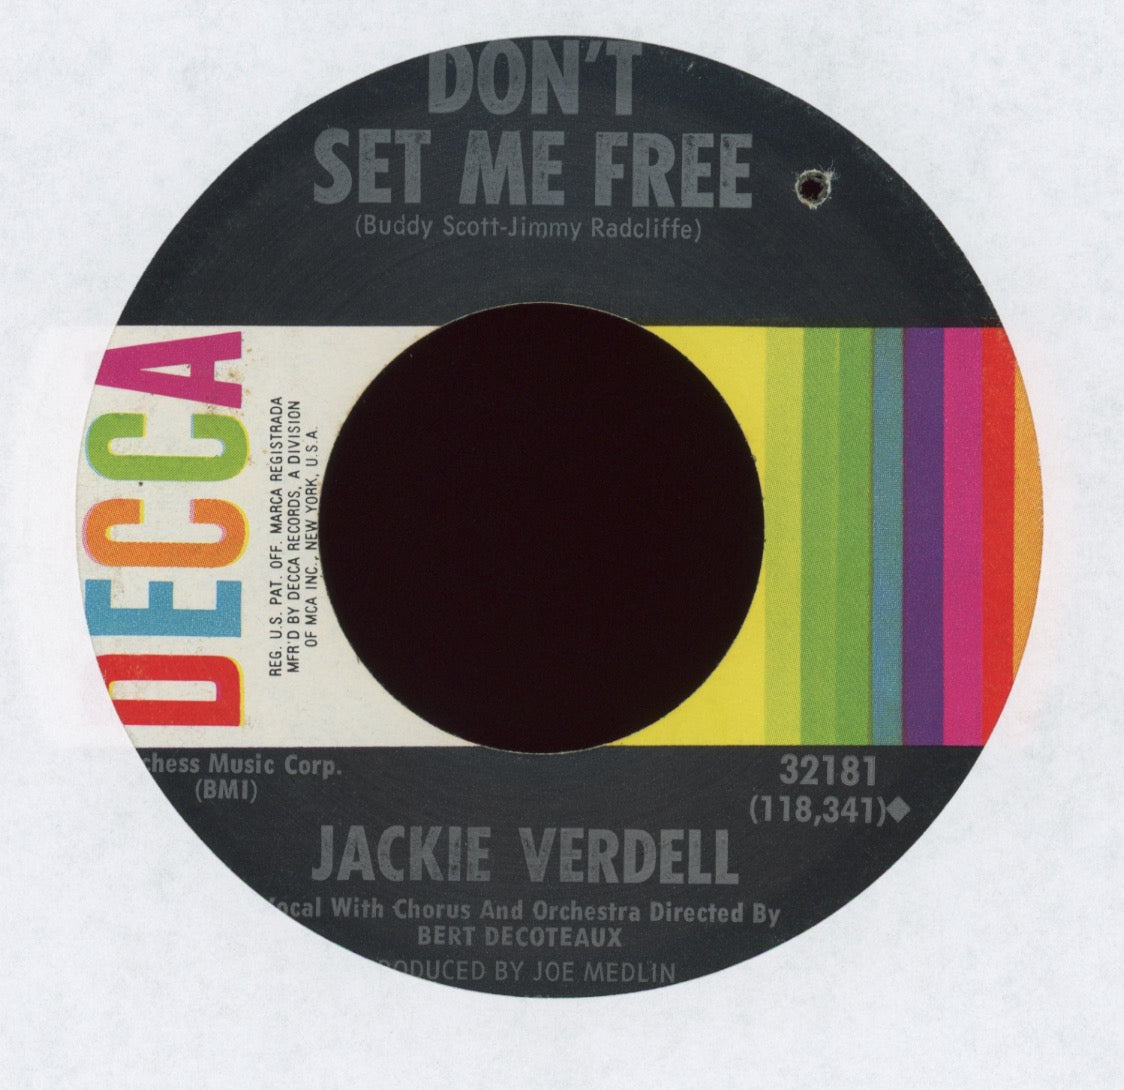 Jackie Verdell - Don't Set Me Free on Decca